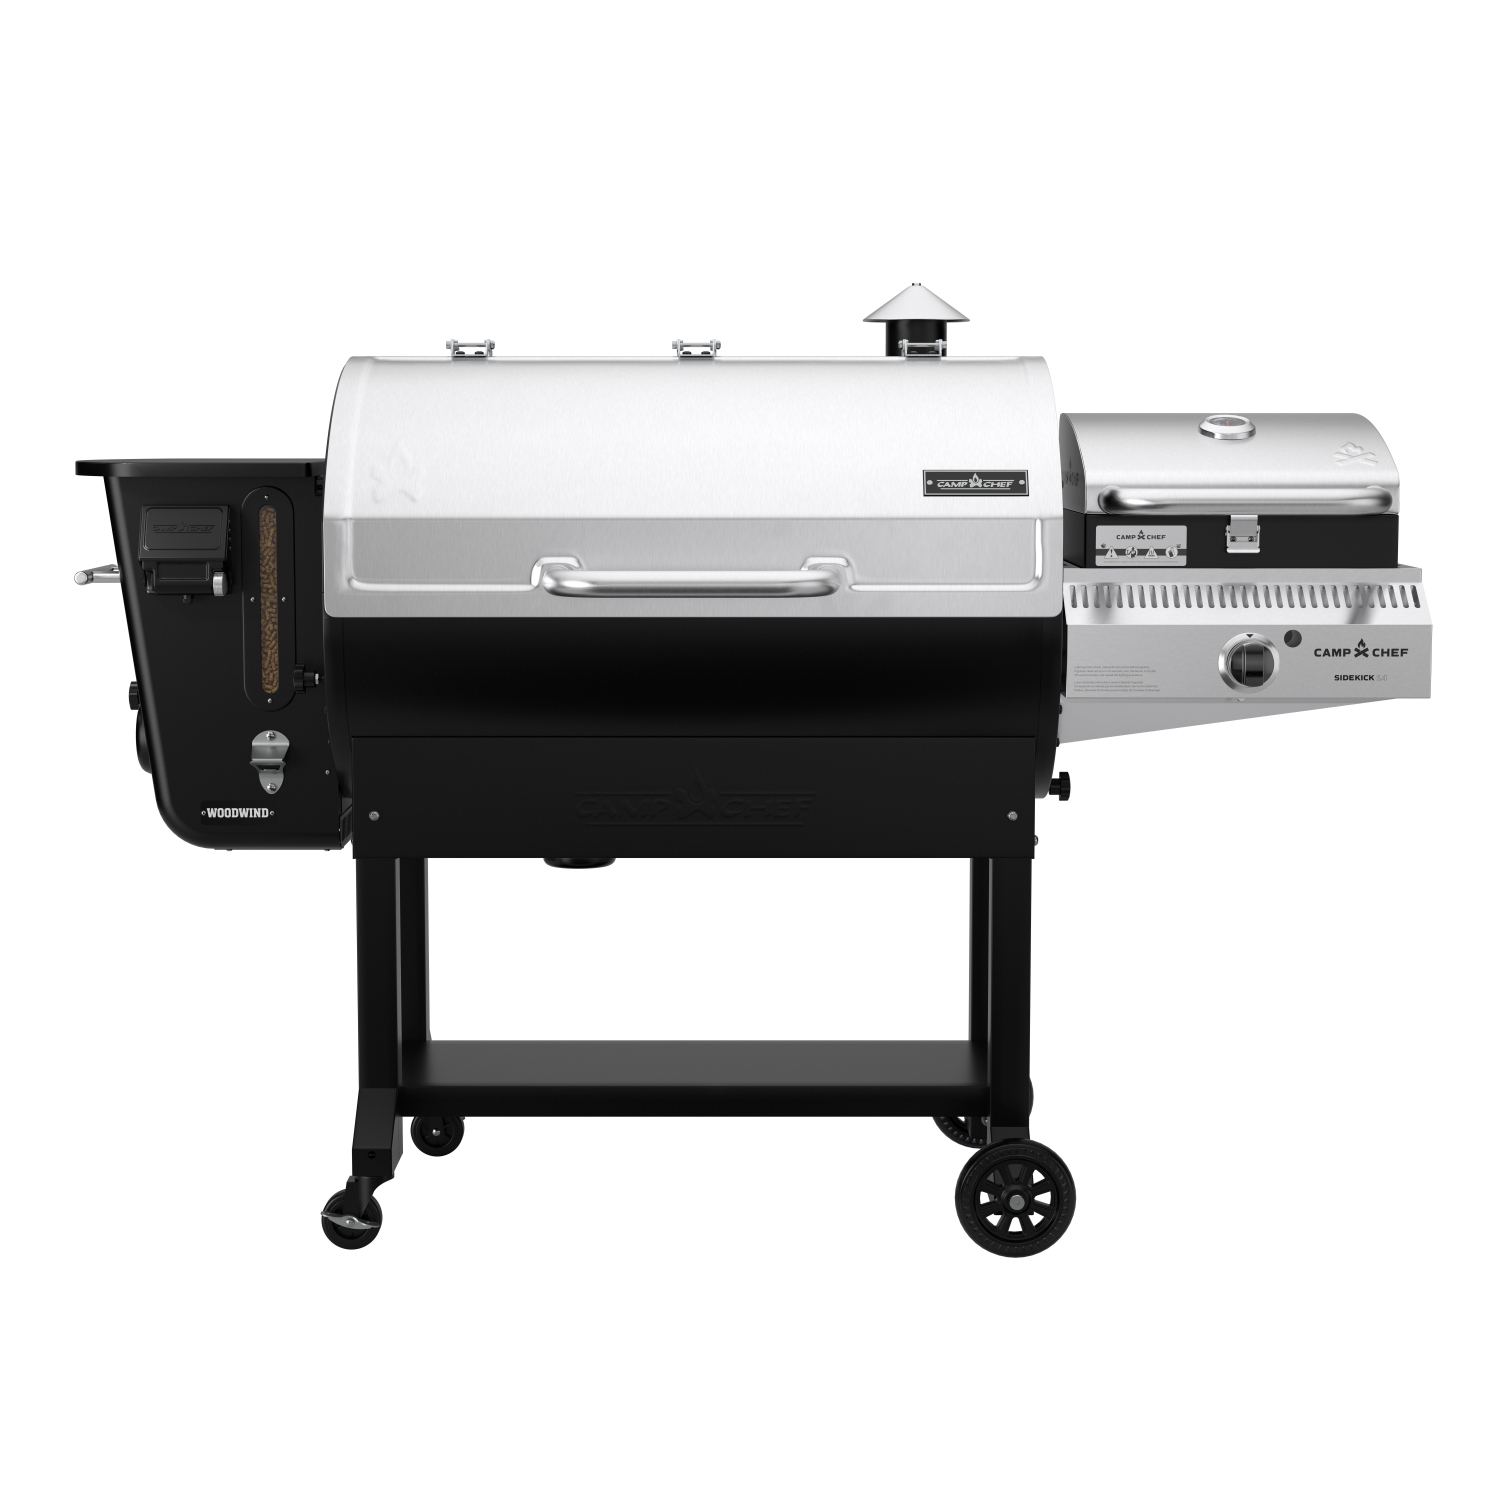 Camp Chef 36 in. WiFi Woodwind Pellet Grill & Smoker - WiFi & Bluetooth Connectivity, PID controller, Stainless Steel, Total Surface Area: 1236 sq. in